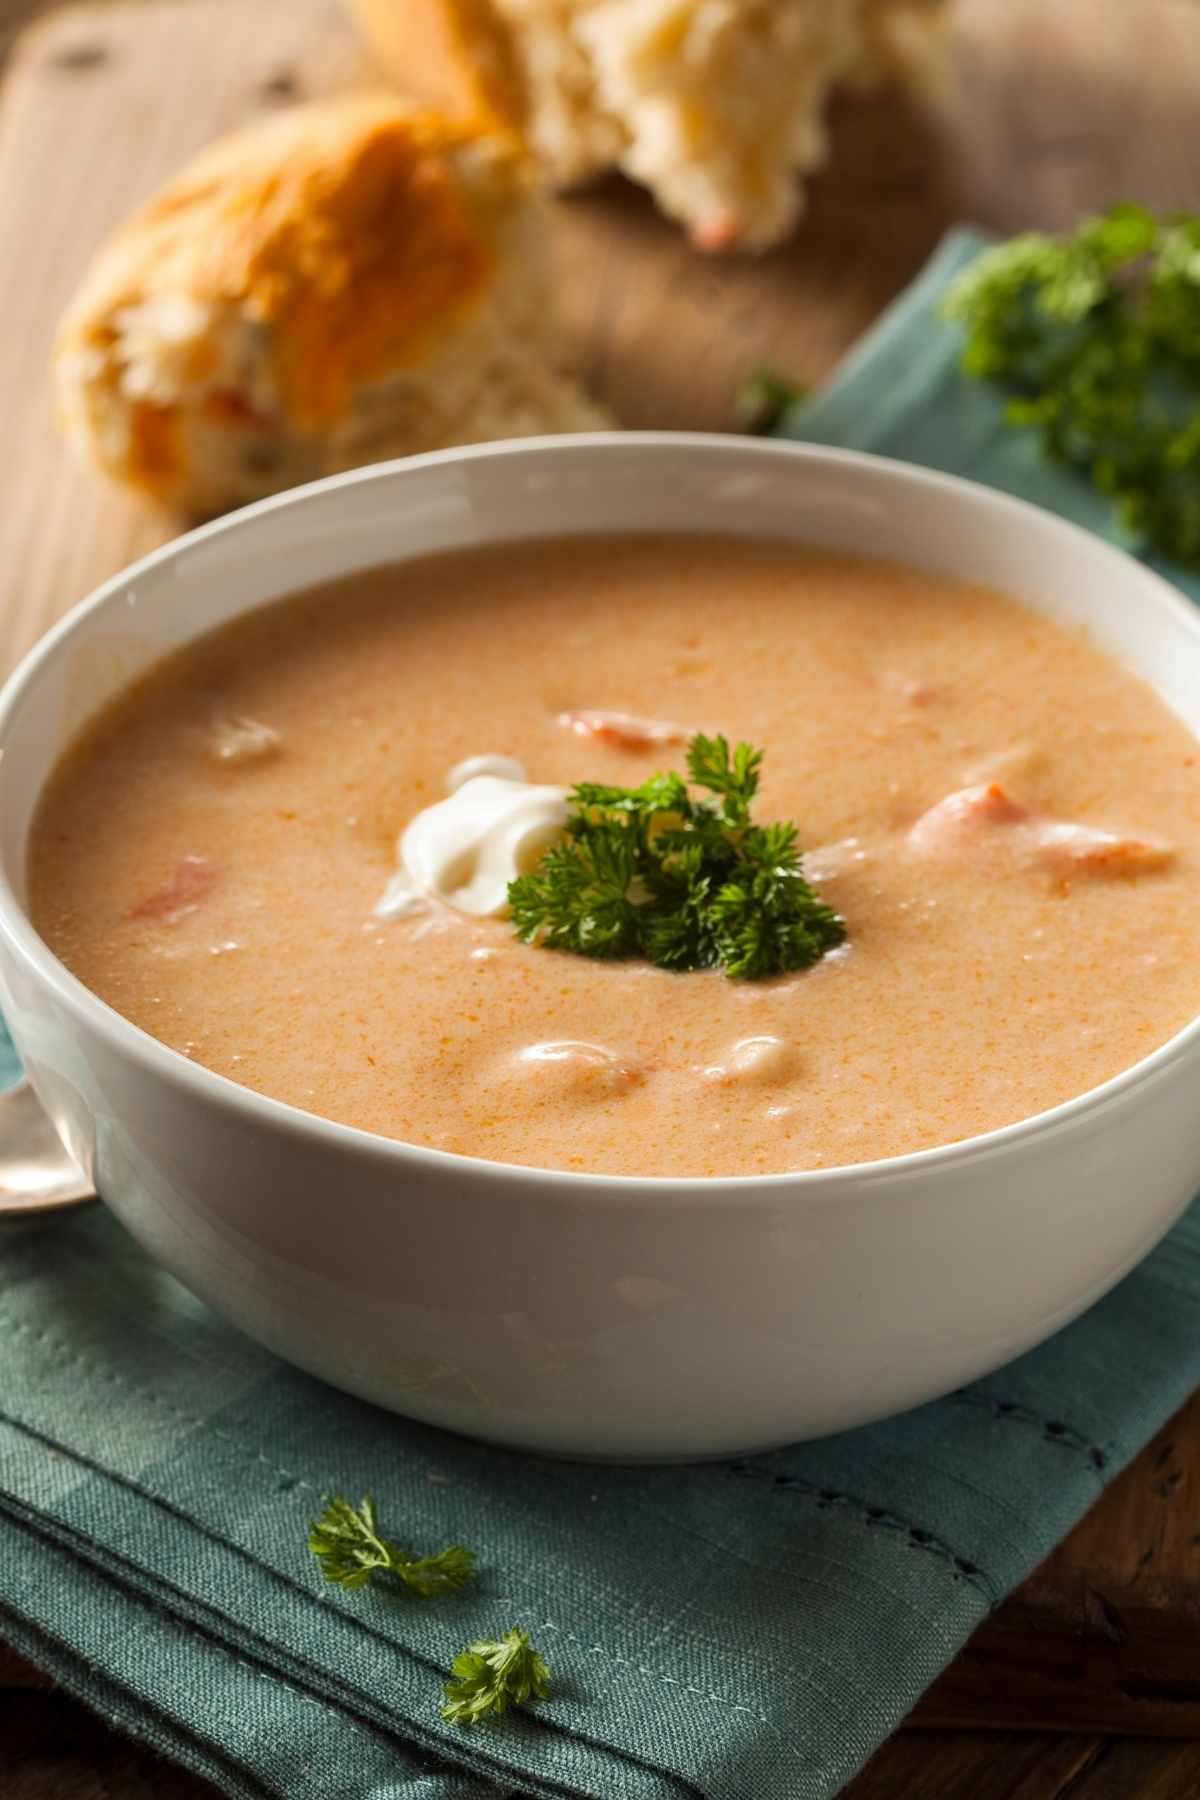 Succulent pieces of crawfish meat are served in a creamy, satisfying soup that’s sure to satisfy your Cajun cravings. Packed with flavor and a bit of a spicy kick, this Crawfish Bisque is a dish you’ll come back to, time and time again.